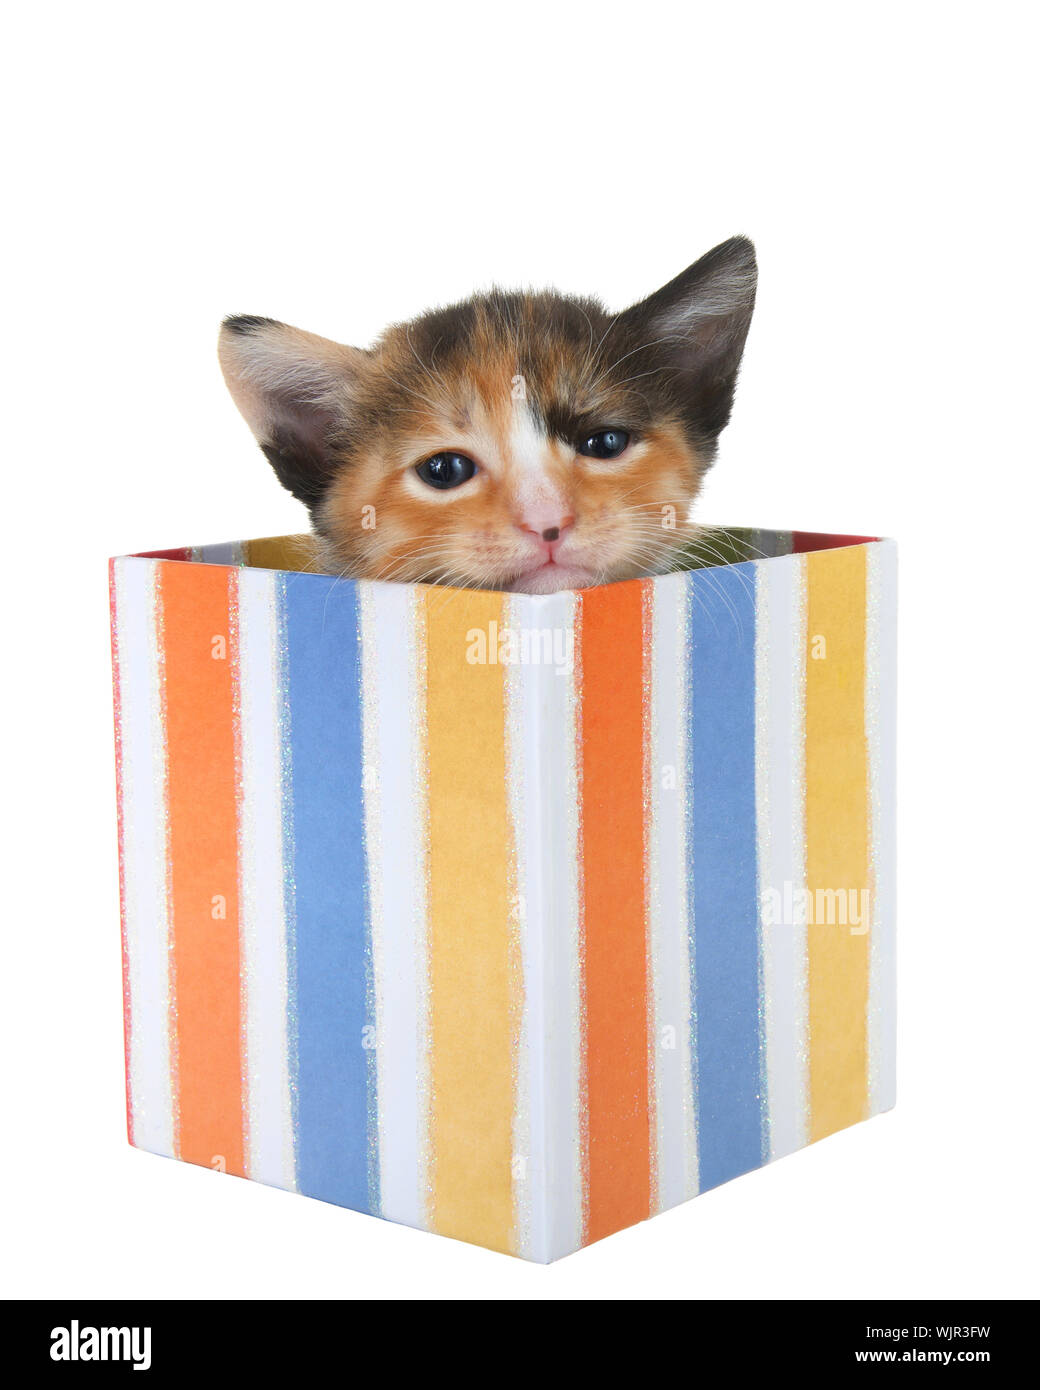 Adorable tiny tortie kitten peaking out of a colorful striped present box isolated on white background. Fun comical animal antics. Stock Photo